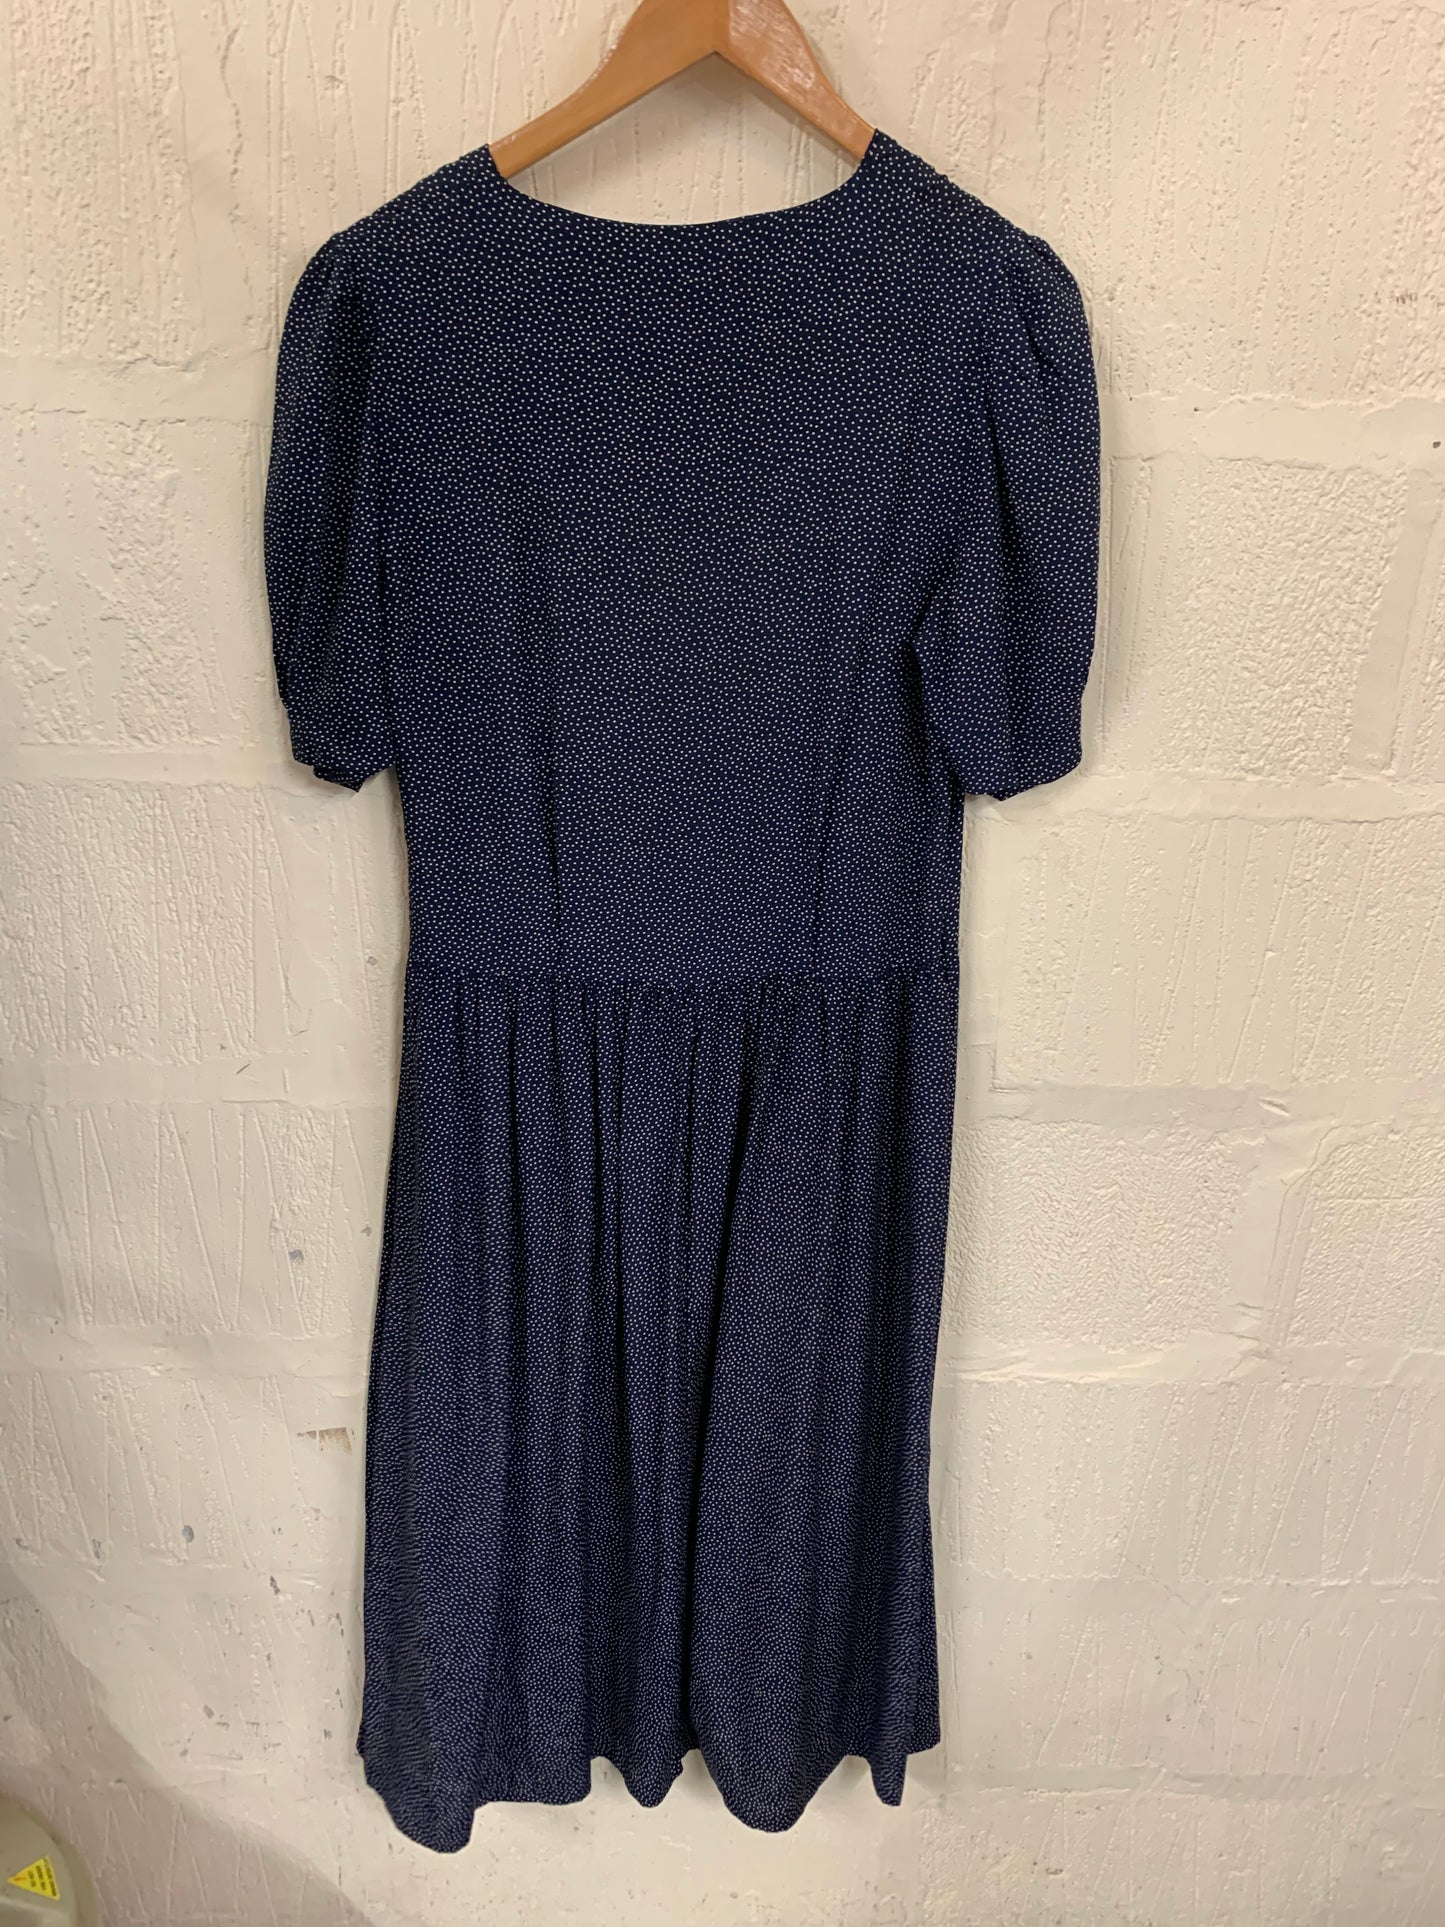 Vintage Navy with White Dots Laura Ashley Midaxi Dress Size 12